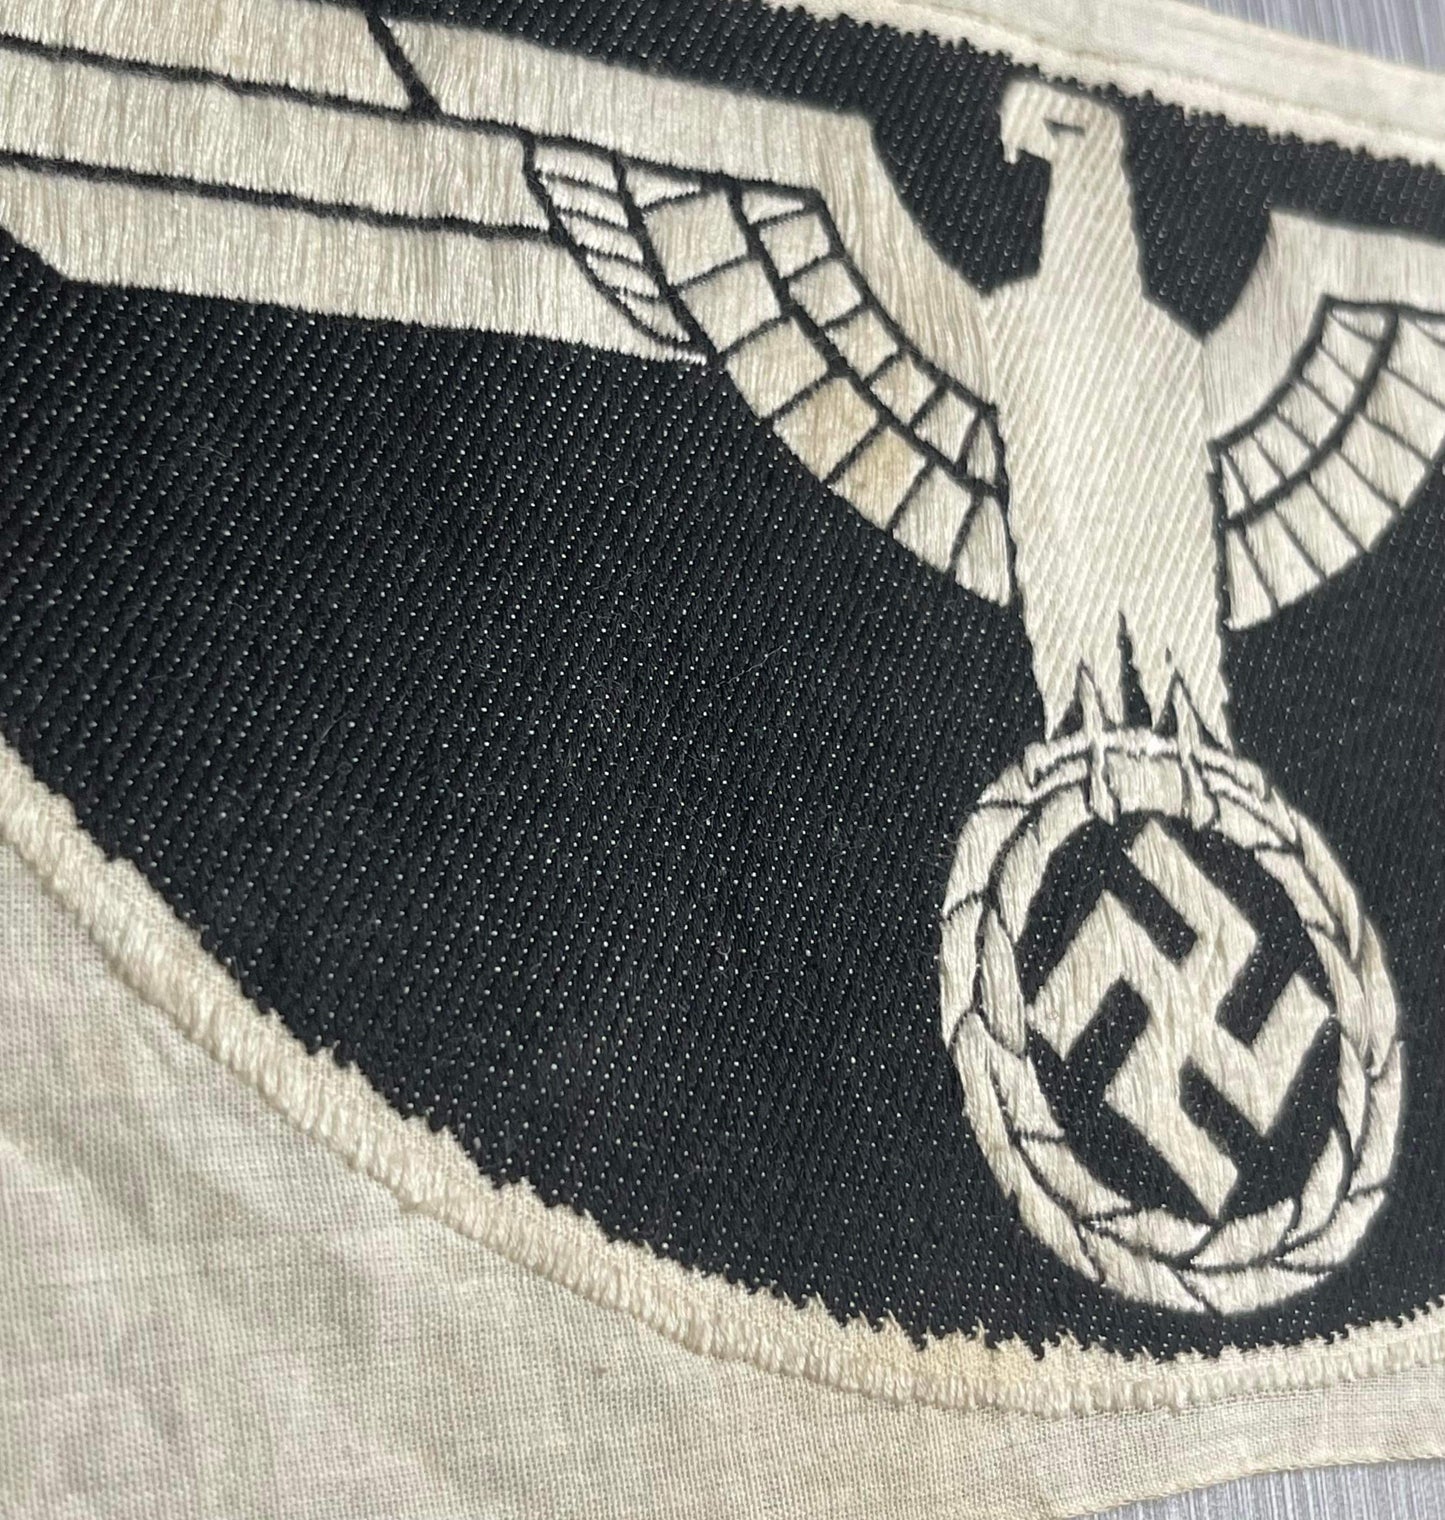 GERMAN WW2 HEER FIRST PATTERN LARGE SPORTS SHIRT BREAST EAGLE #2